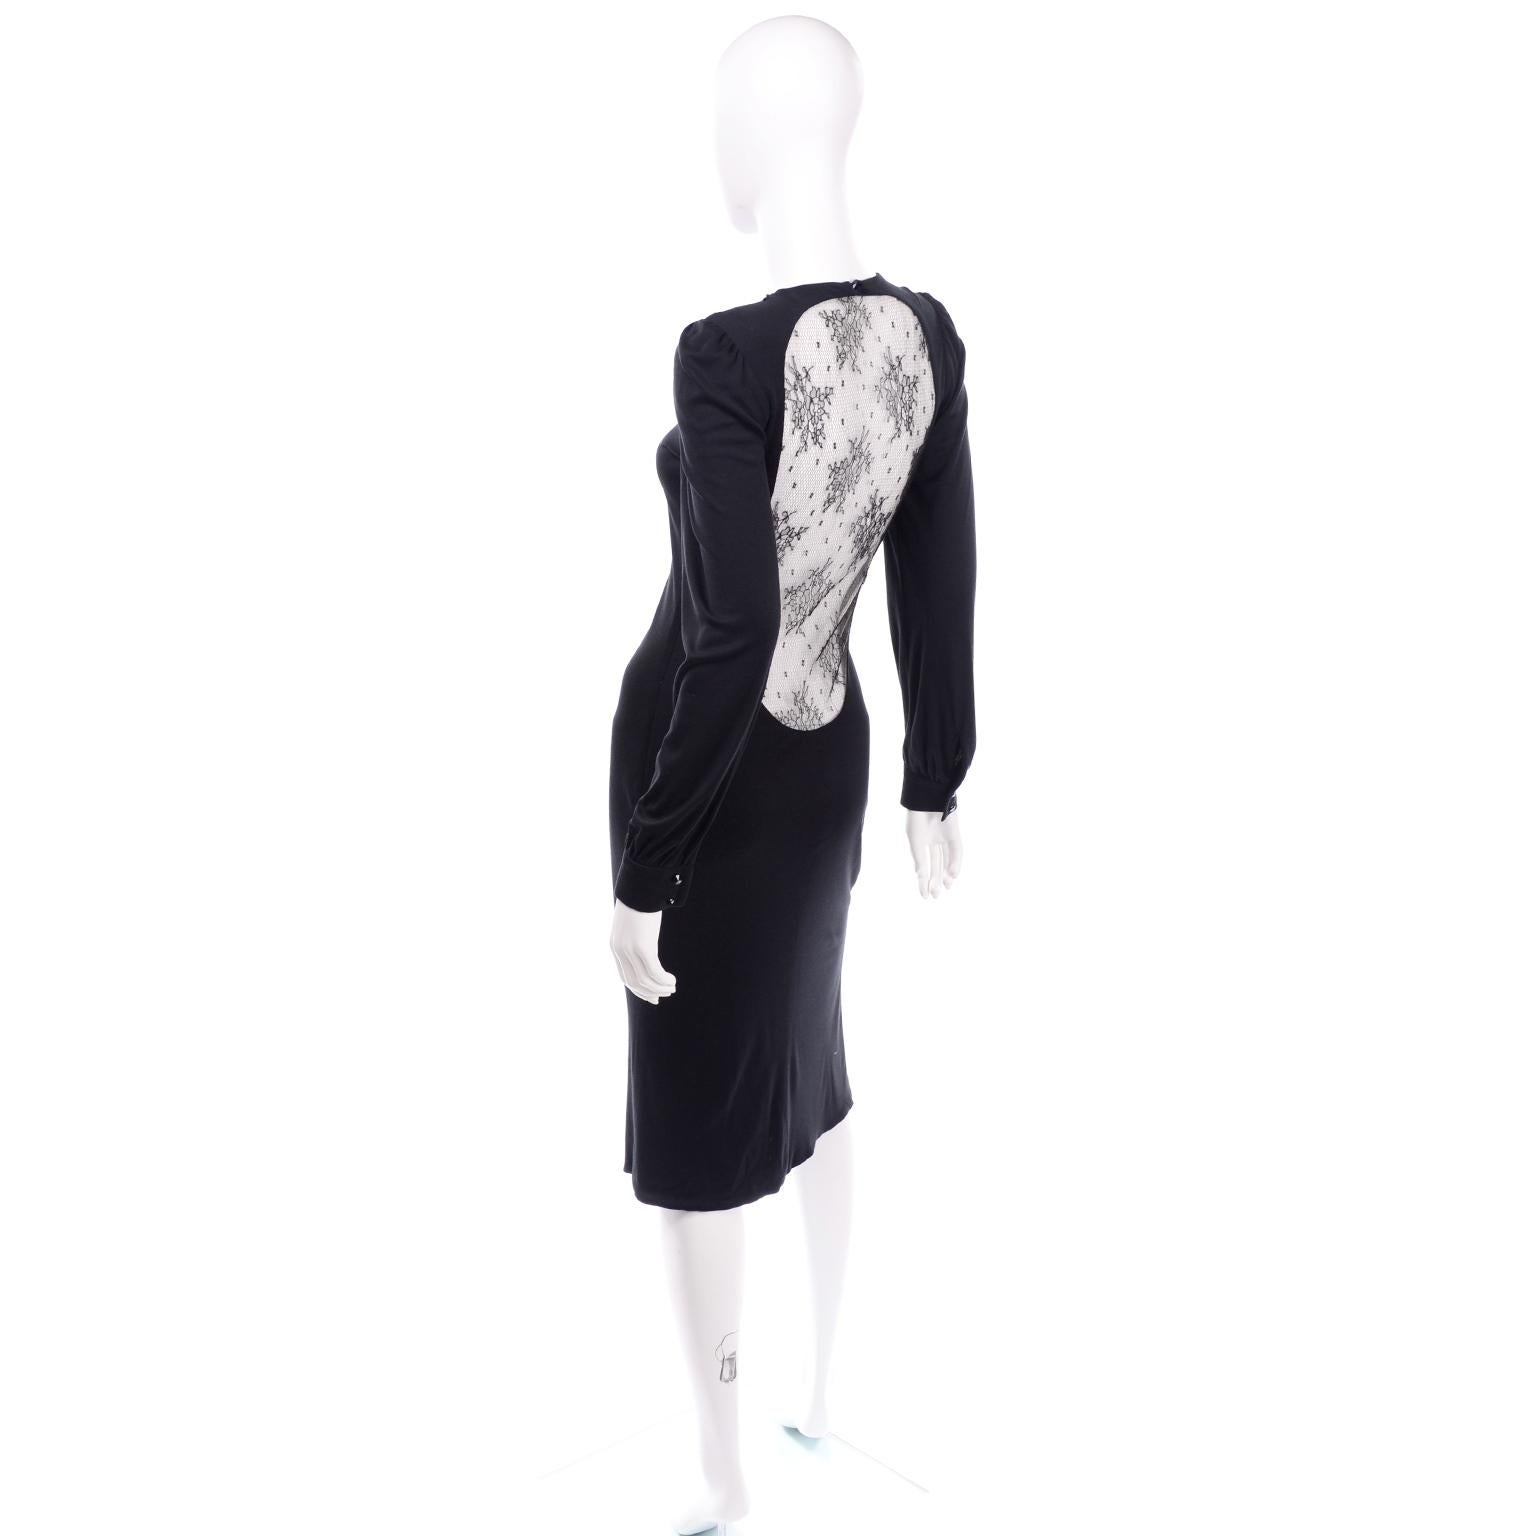 Alexander McQueen Black Dress With Low Lace Back 2005 The Man Who Knew Too Much In Excellent Condition For Sale In Portland, OR